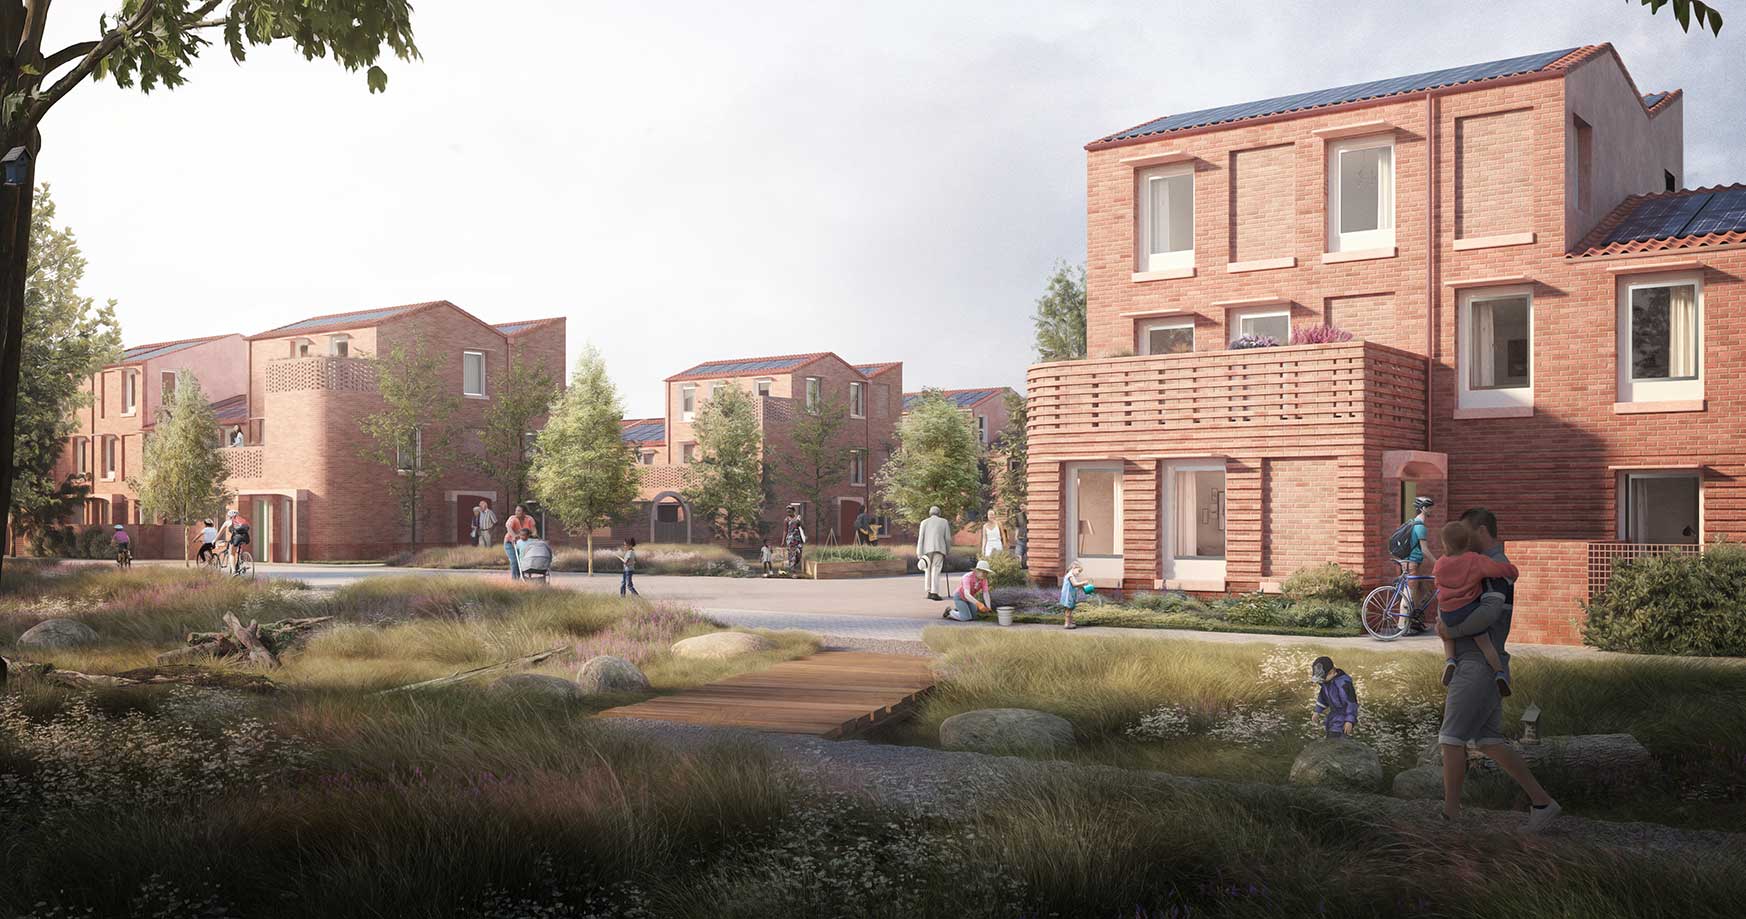 An artists rendering of the new Burnholme development. The scene shows a collection of new homes with people walking in front of them.